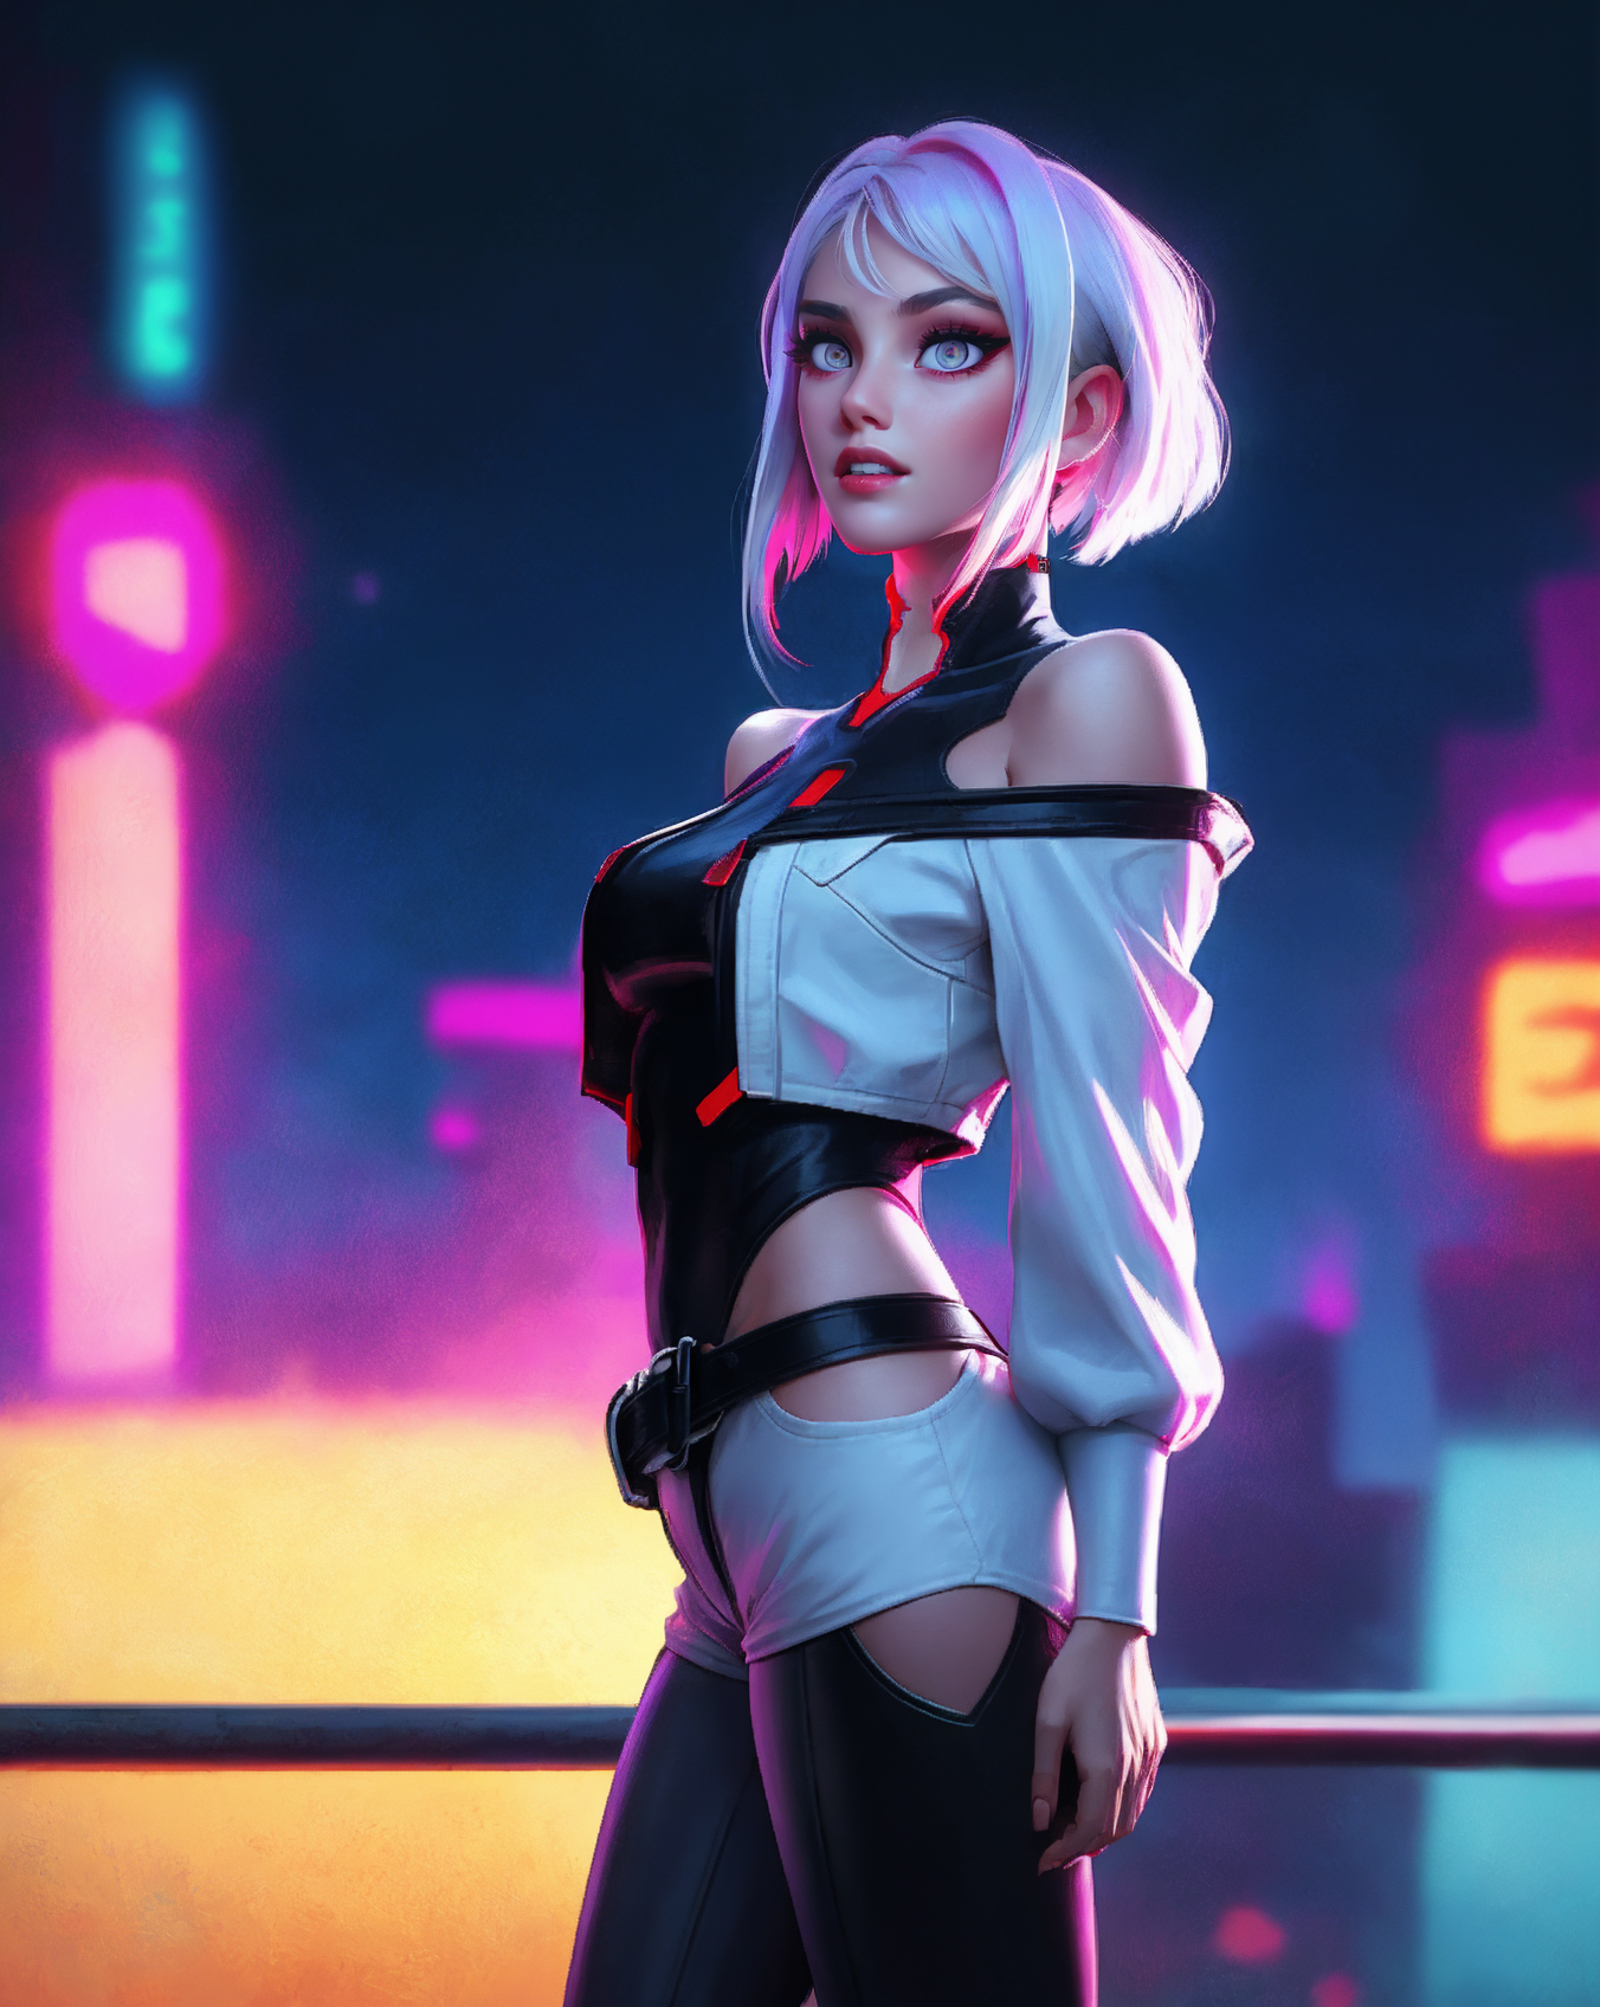 A 3D animated image of a woman in white and black clothing standing in front of a brightly lit cityscape.